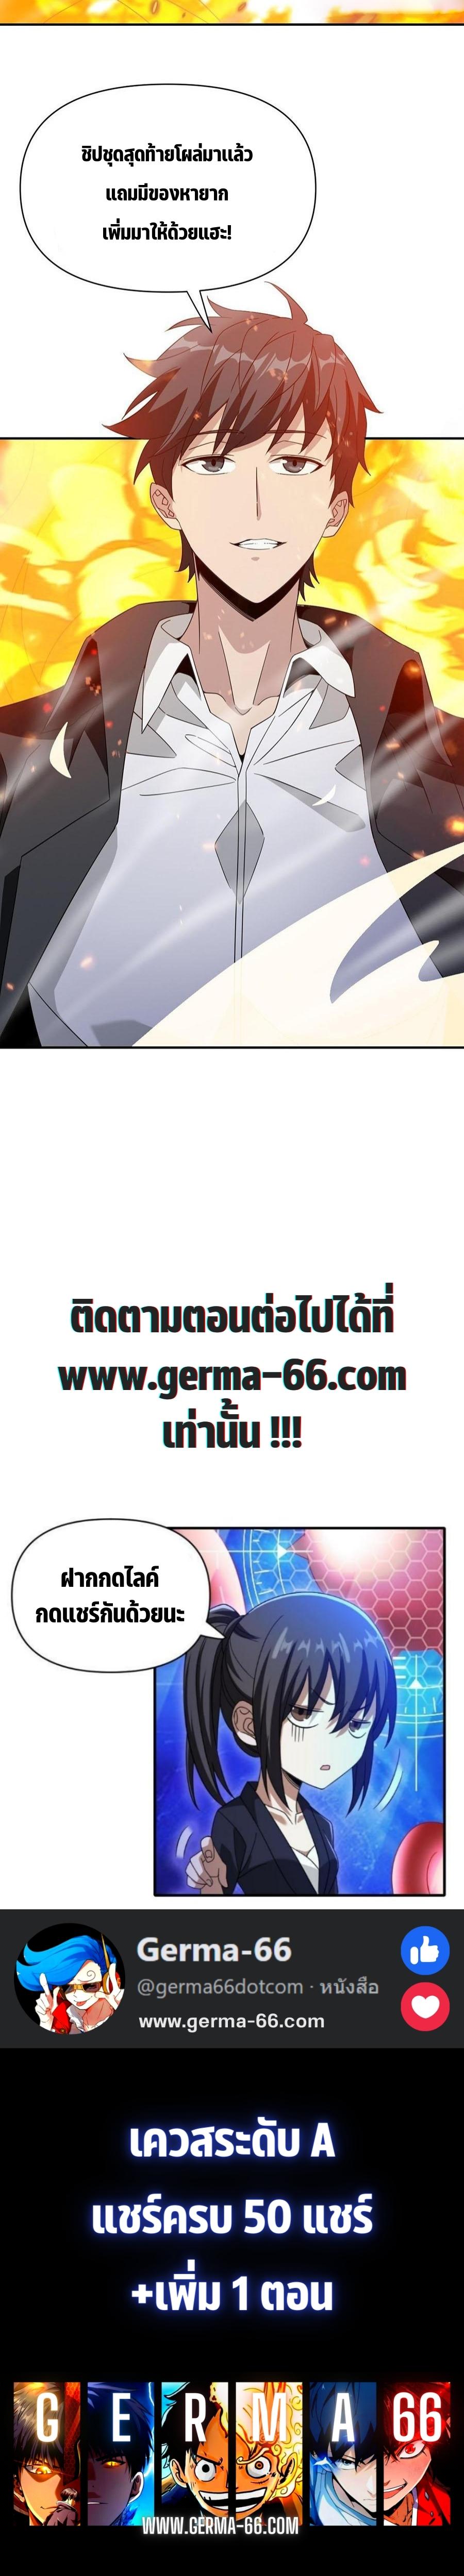 germa 66 trapped 3000 ep 14.19